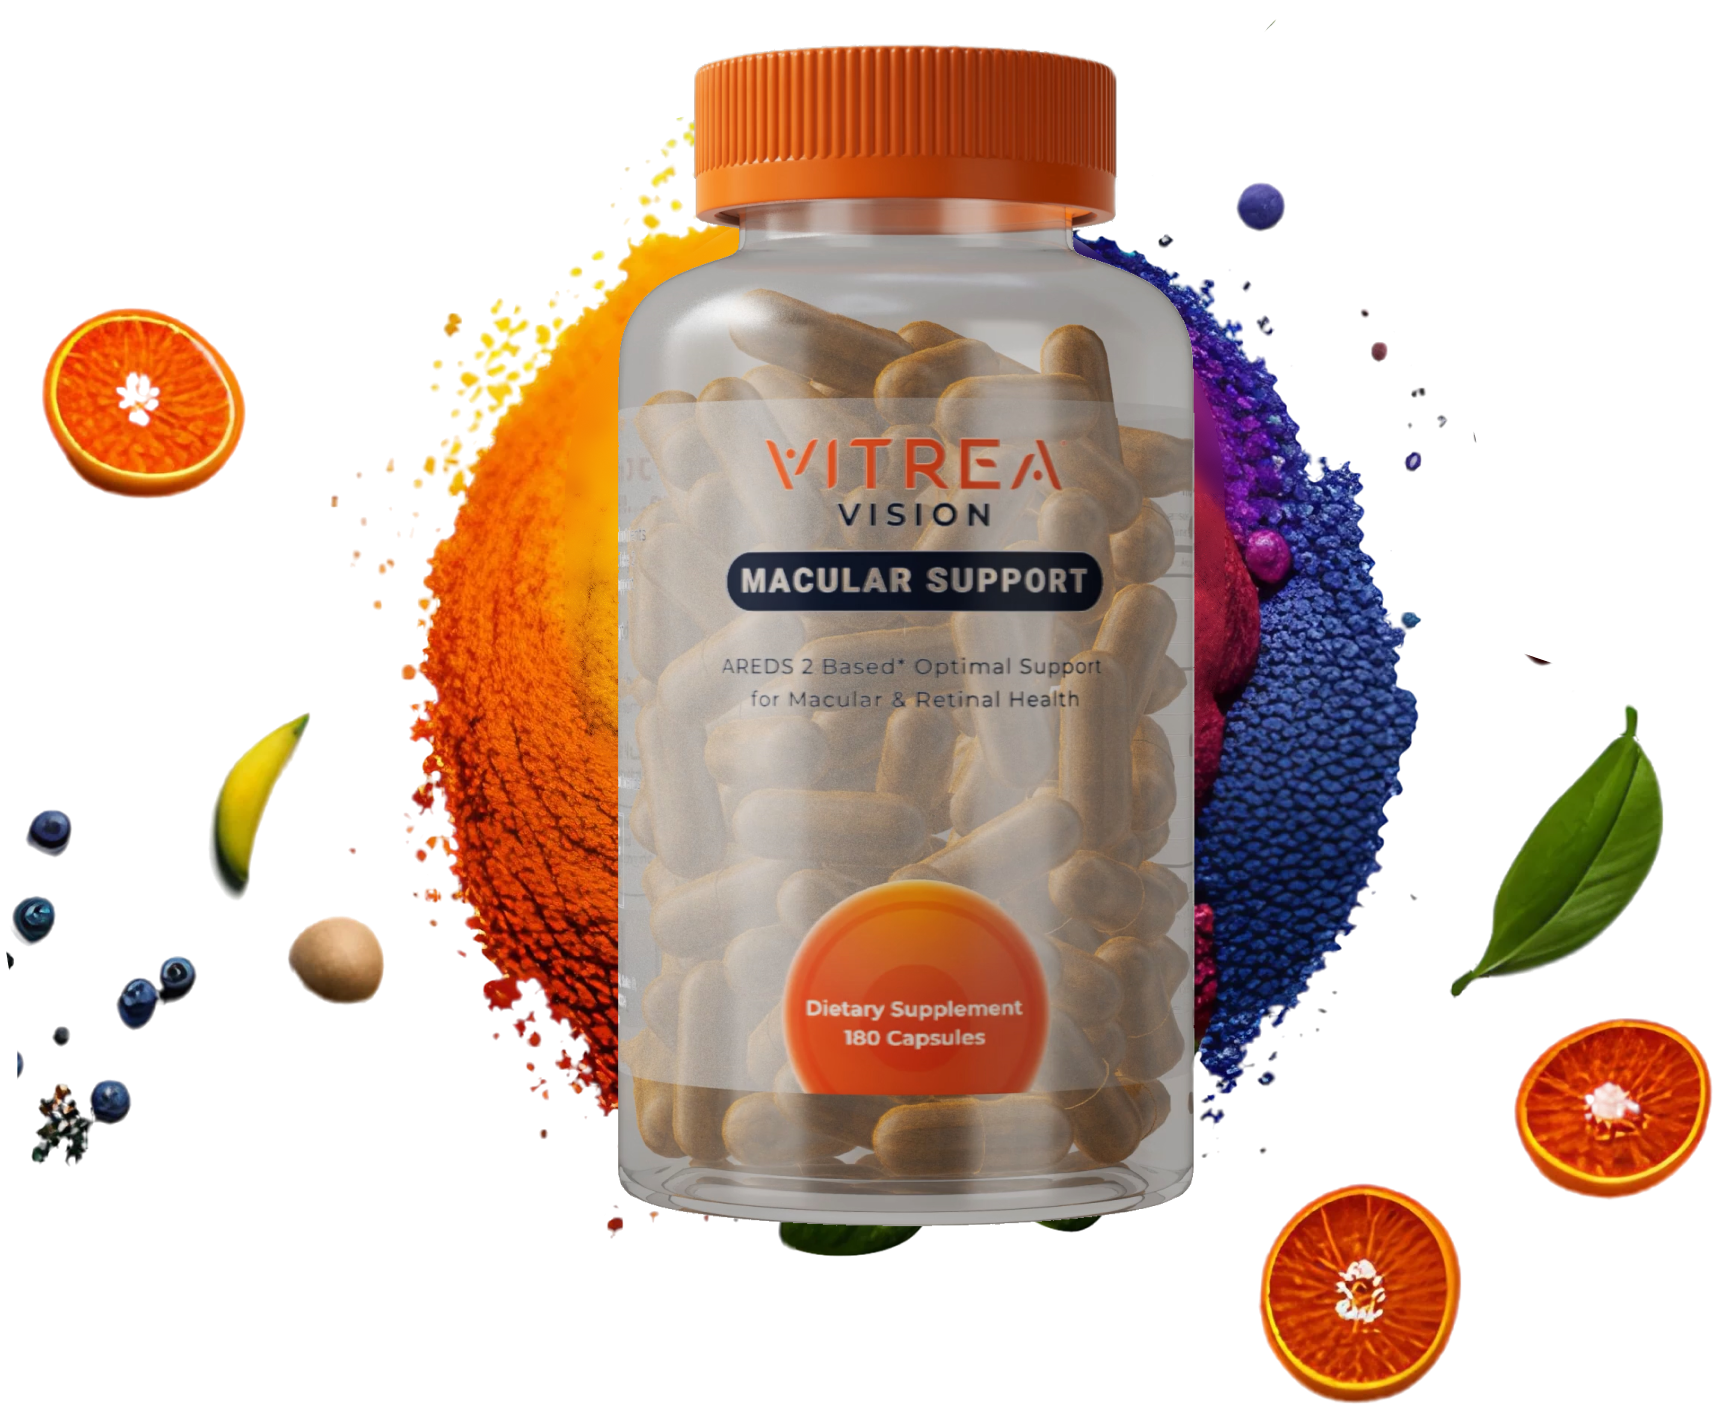 Vitrea Vision Macular Restore jar on top of spices